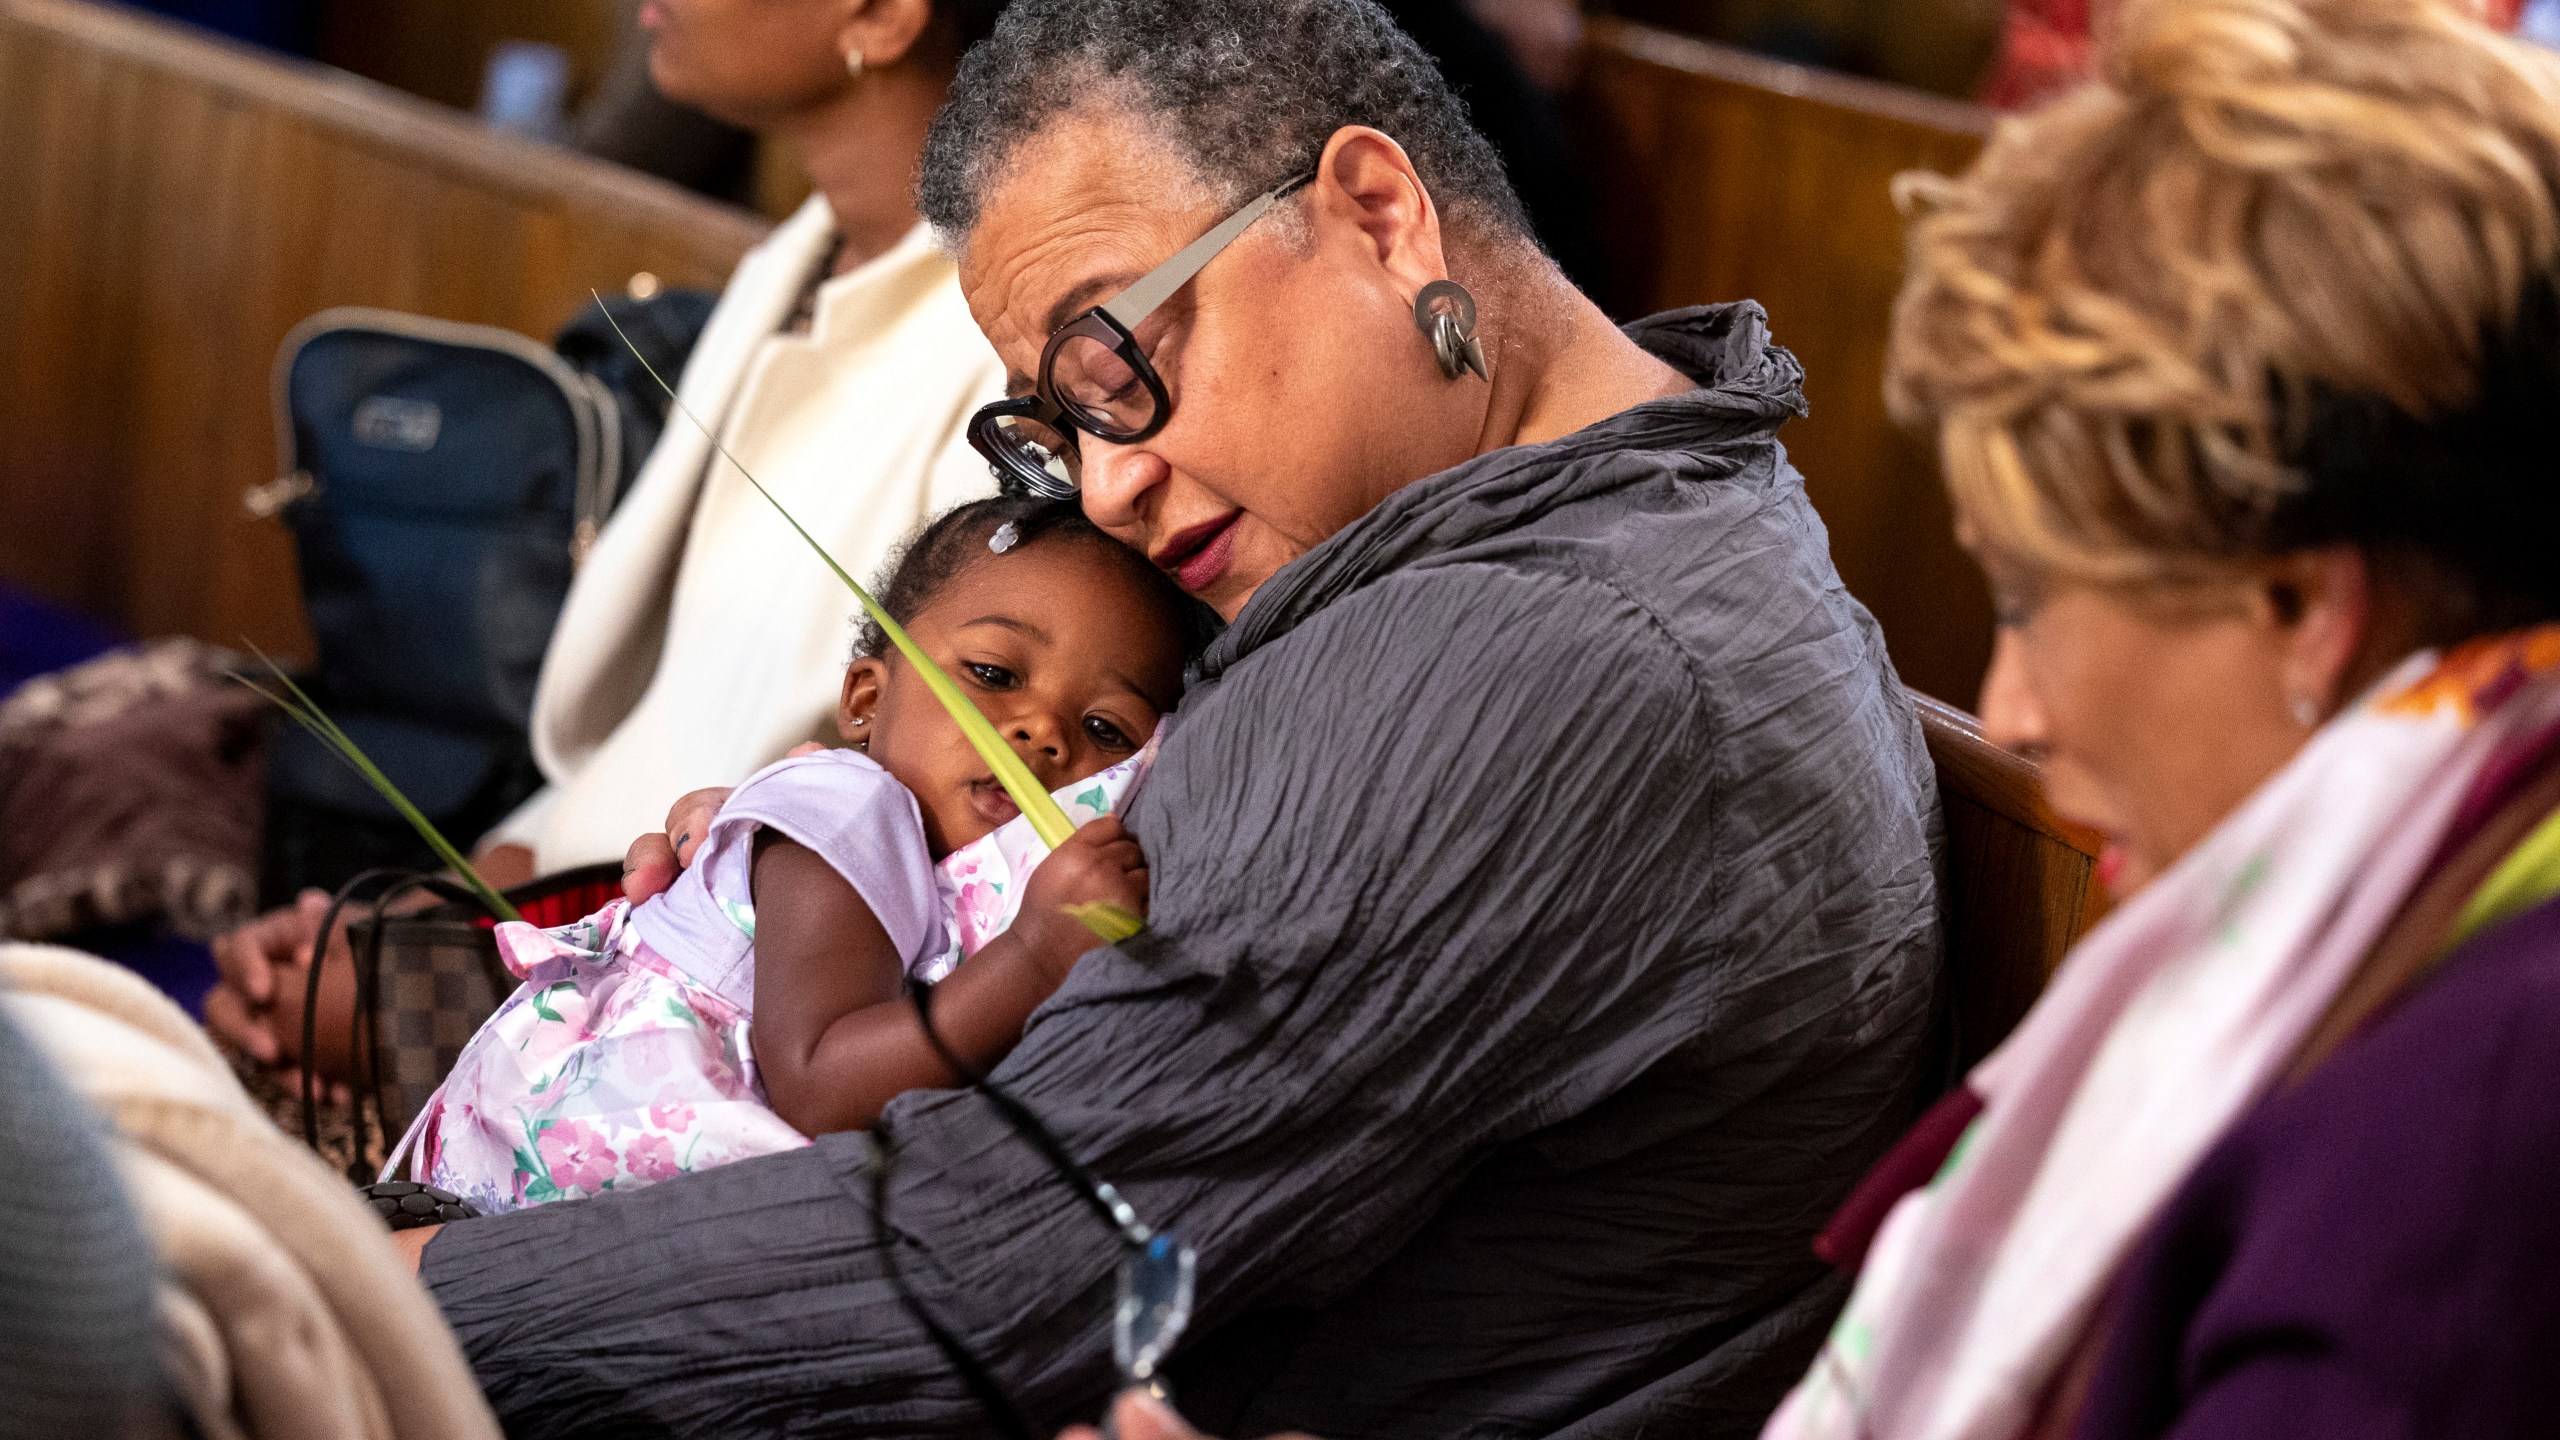 Marie Johns holds her her one-year-old daughter during Palm Sunday services at the Metropolitan AME Church in Washington, Sunday, March 24, 2024. Rev. William Lamar IV at Washington, D.C.’s historic Metropolitan AME has adjusted to offering both virtual and in-person services since the COVID-19 pandemic. After a noticeable attendance drop, more Metropolitan congregants are choosing in-person worship over virtual, even as they mourn members who died from COVID-19. (AP Photo/Amanda Andrade-Rhoades)